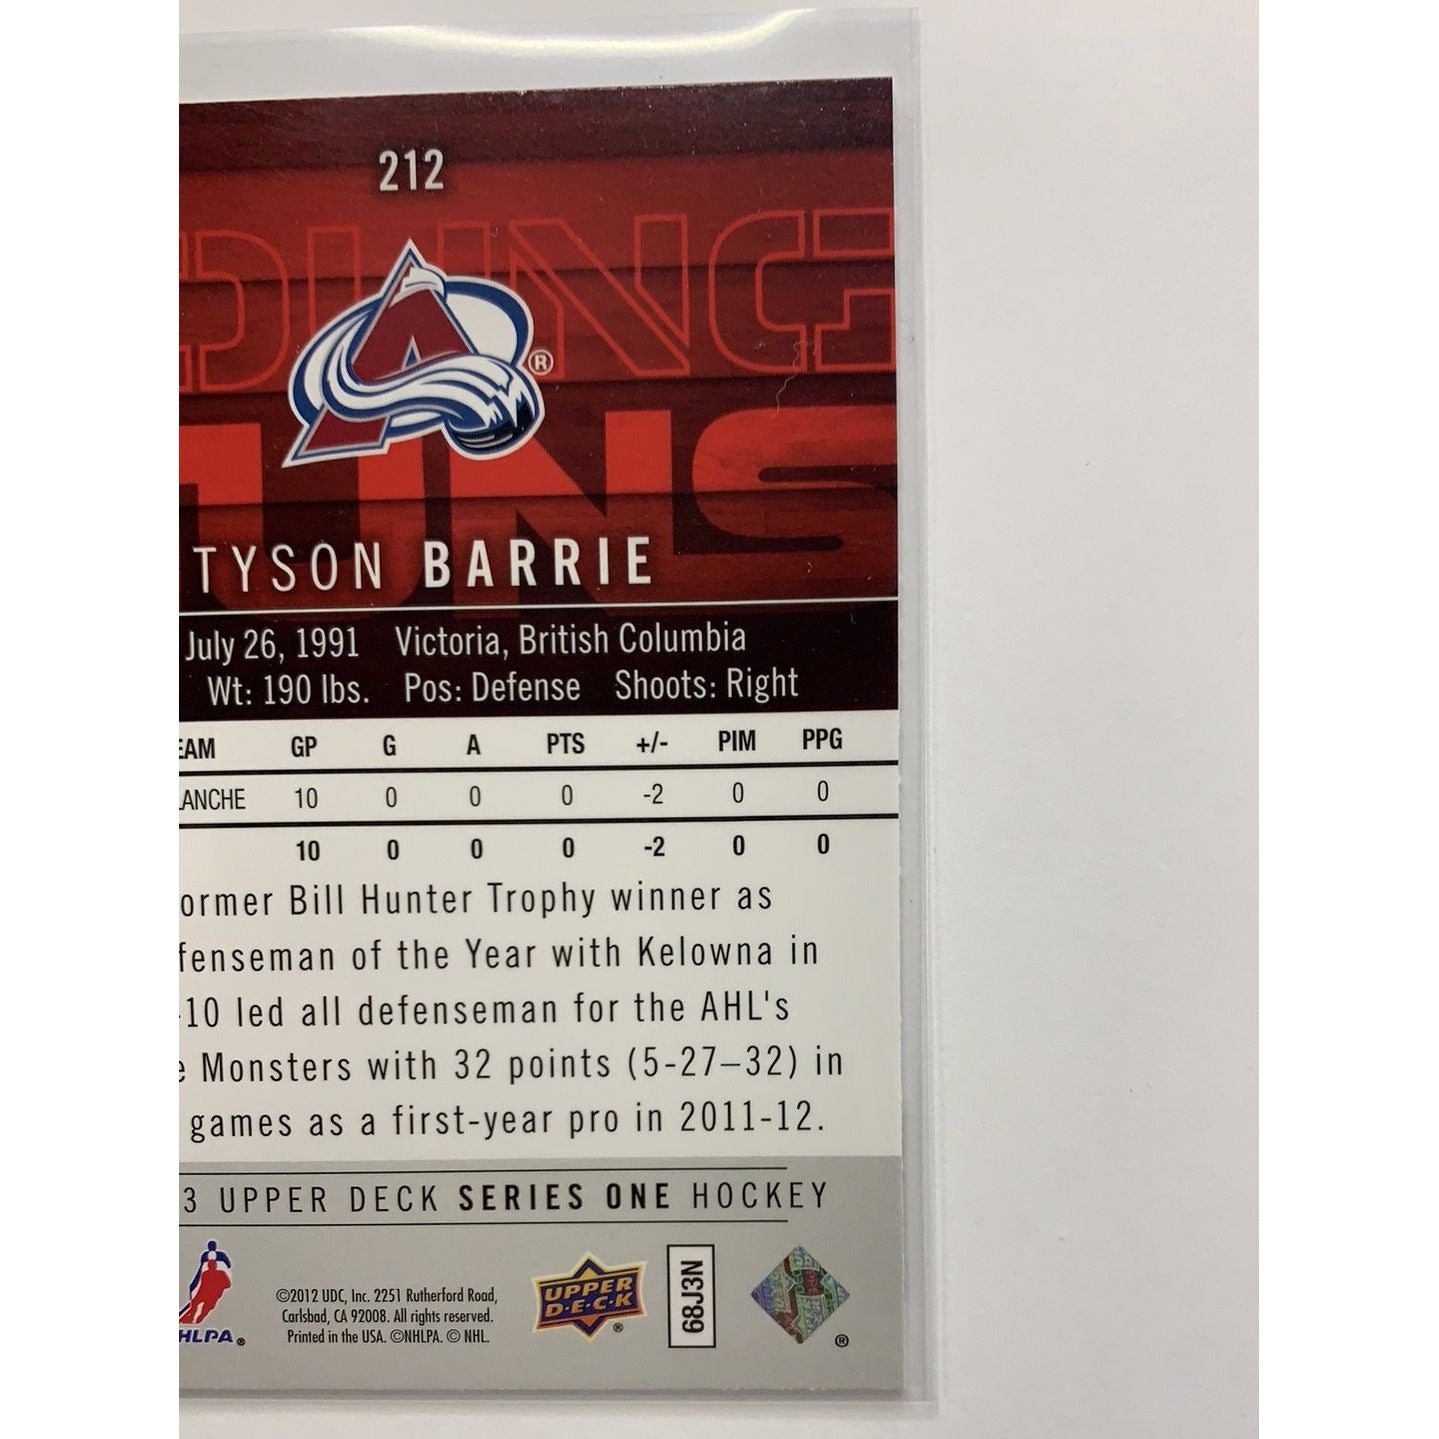  2012-13 Upper Deck Series One Tyson Barrie Young Guns  Local Legends Cards & Collectibles